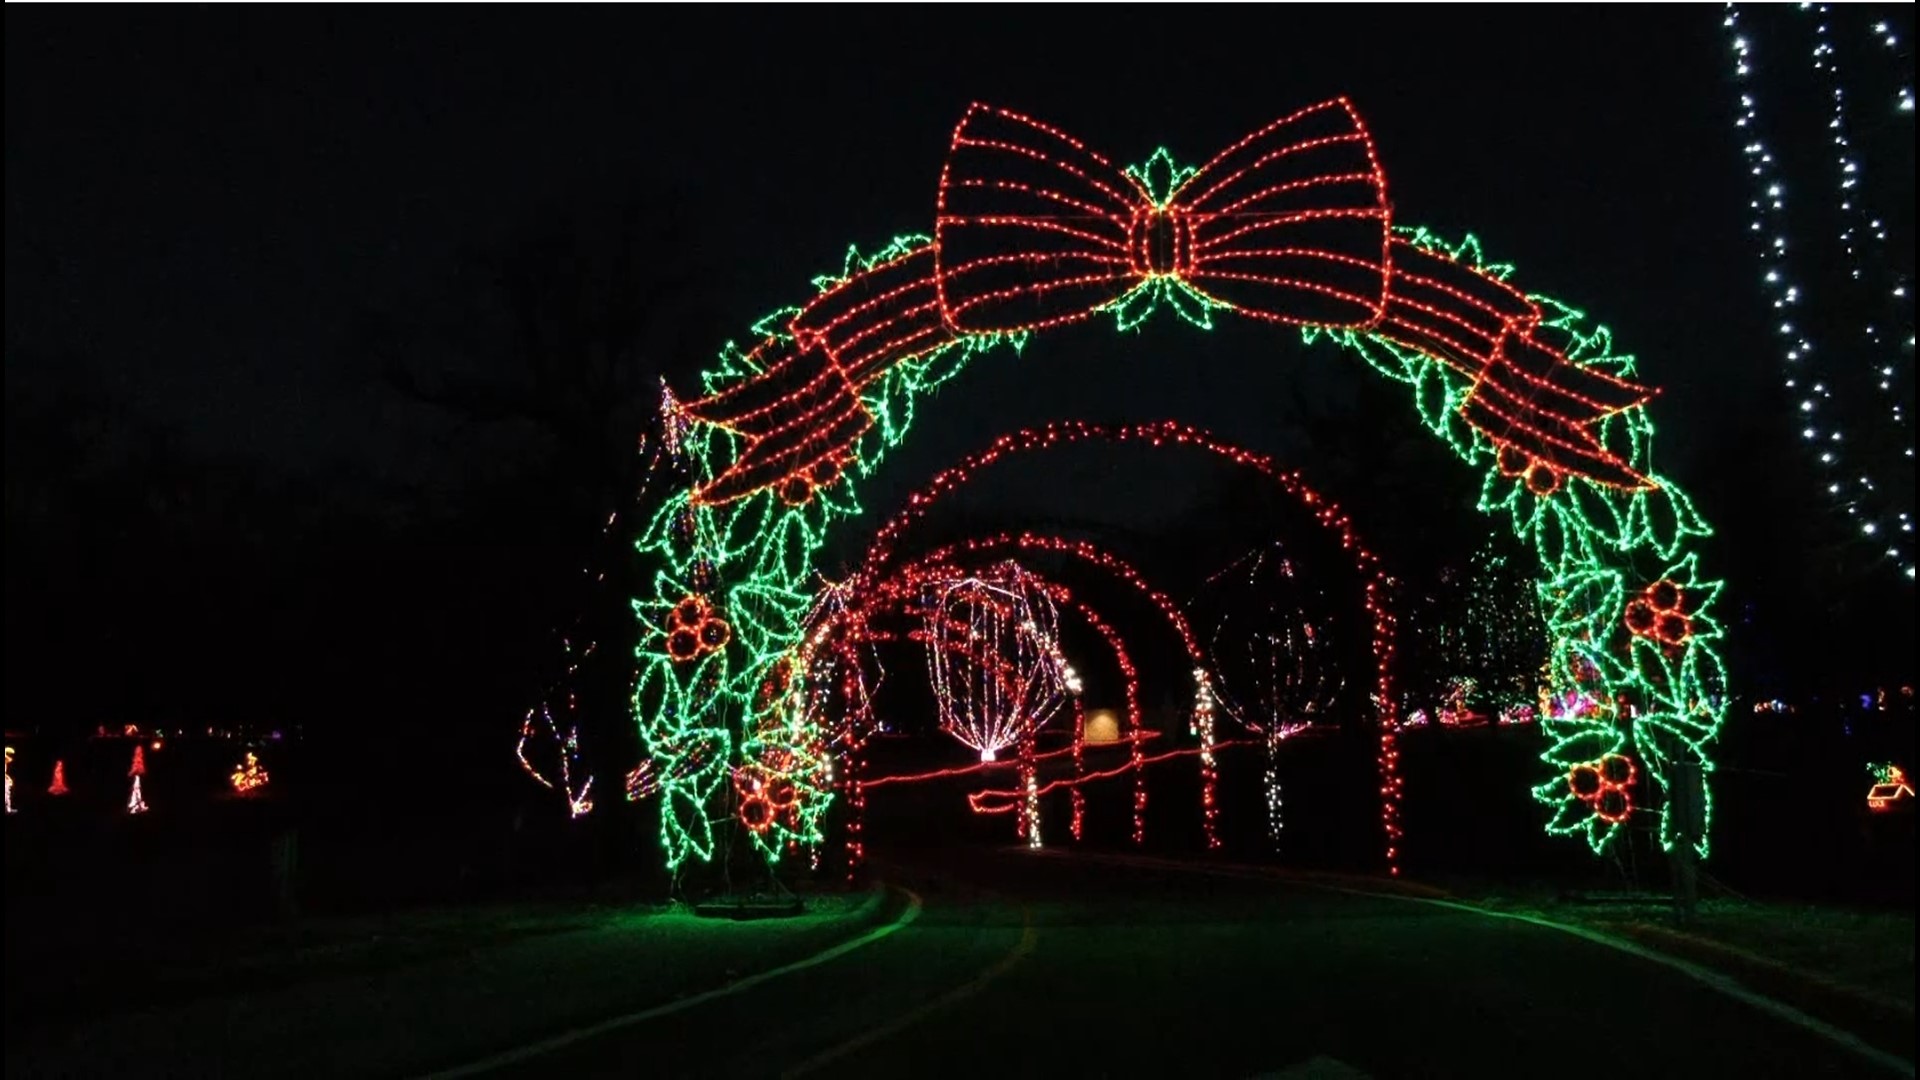 Each year, the holiday lights turn Tilles Park into a winter wonderland. Join 5 On Your Side as we ride through the attraction.